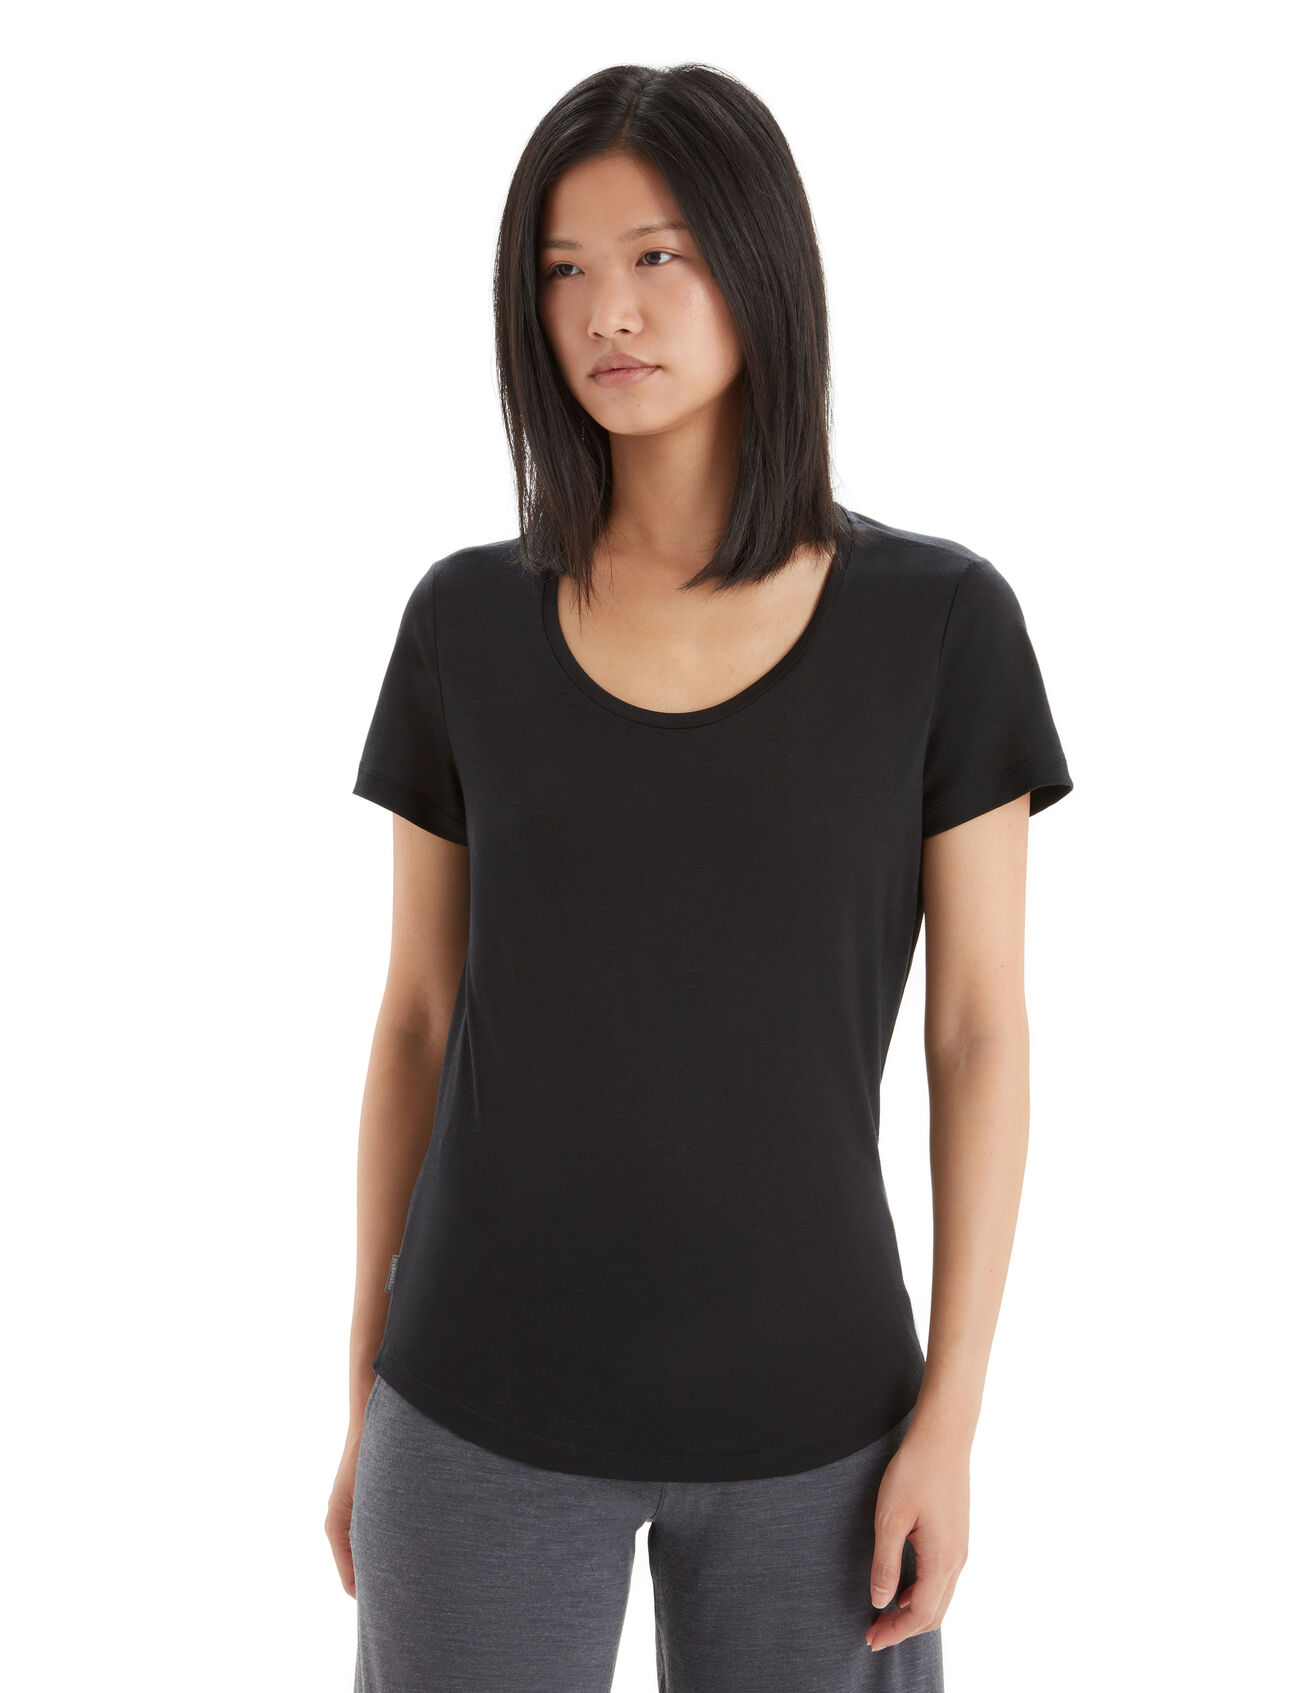 Womens Merino Sphere II Short Sleeve Scoop Neck Tee A soft merino-blend tee made with our lightweight Cool-Lite™ jersey fabric, the Sphere II Short Sleeve Scoop Tee provides natural breathability, odor resistance and comfort.